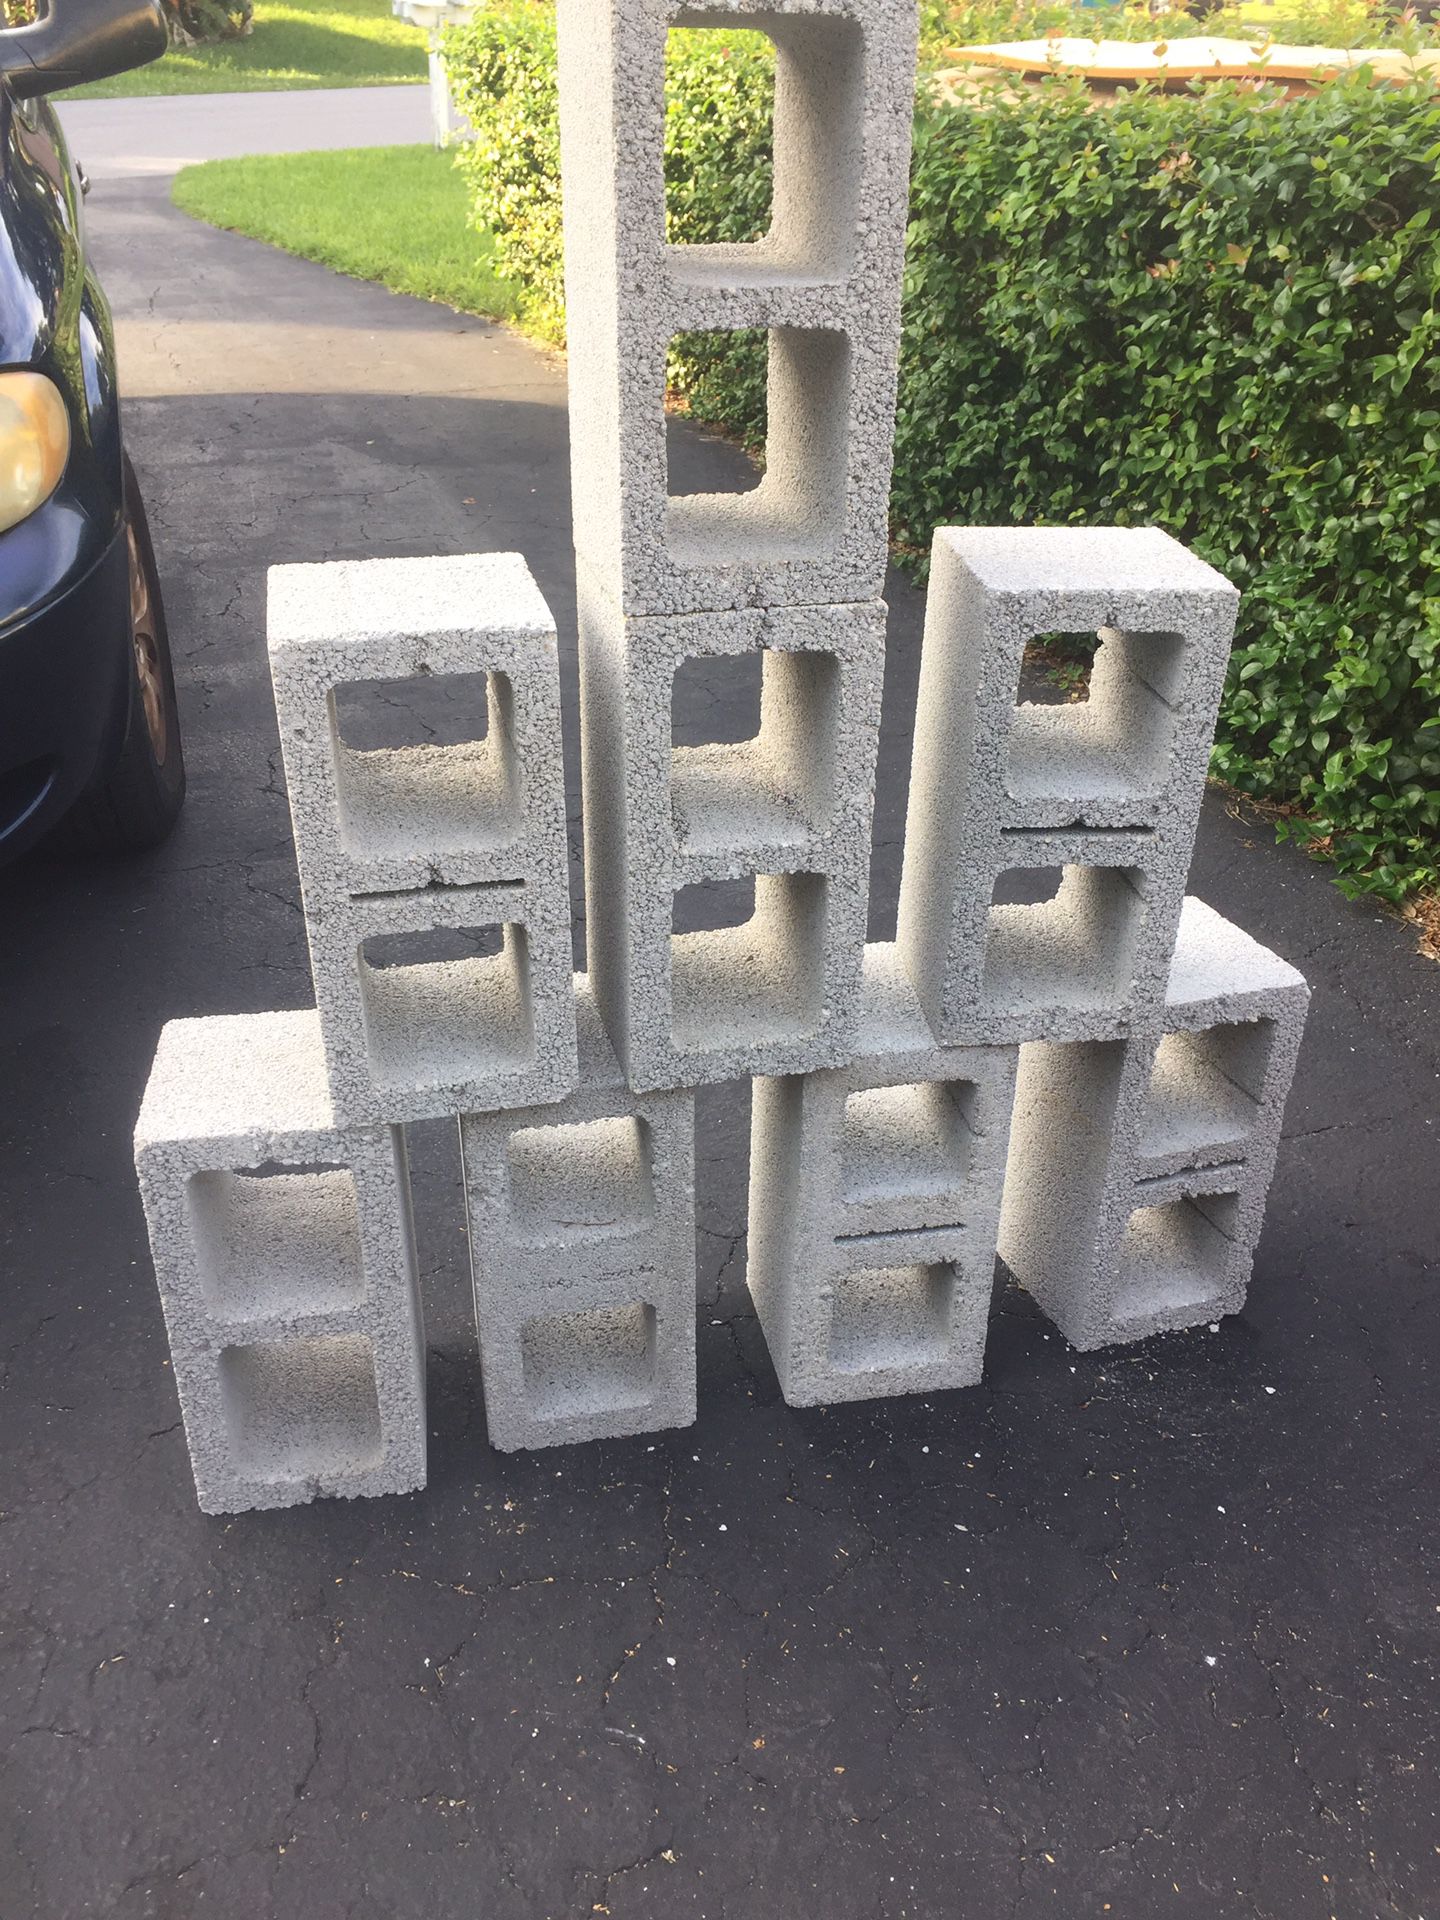 8 clean cinder blocks all for $5